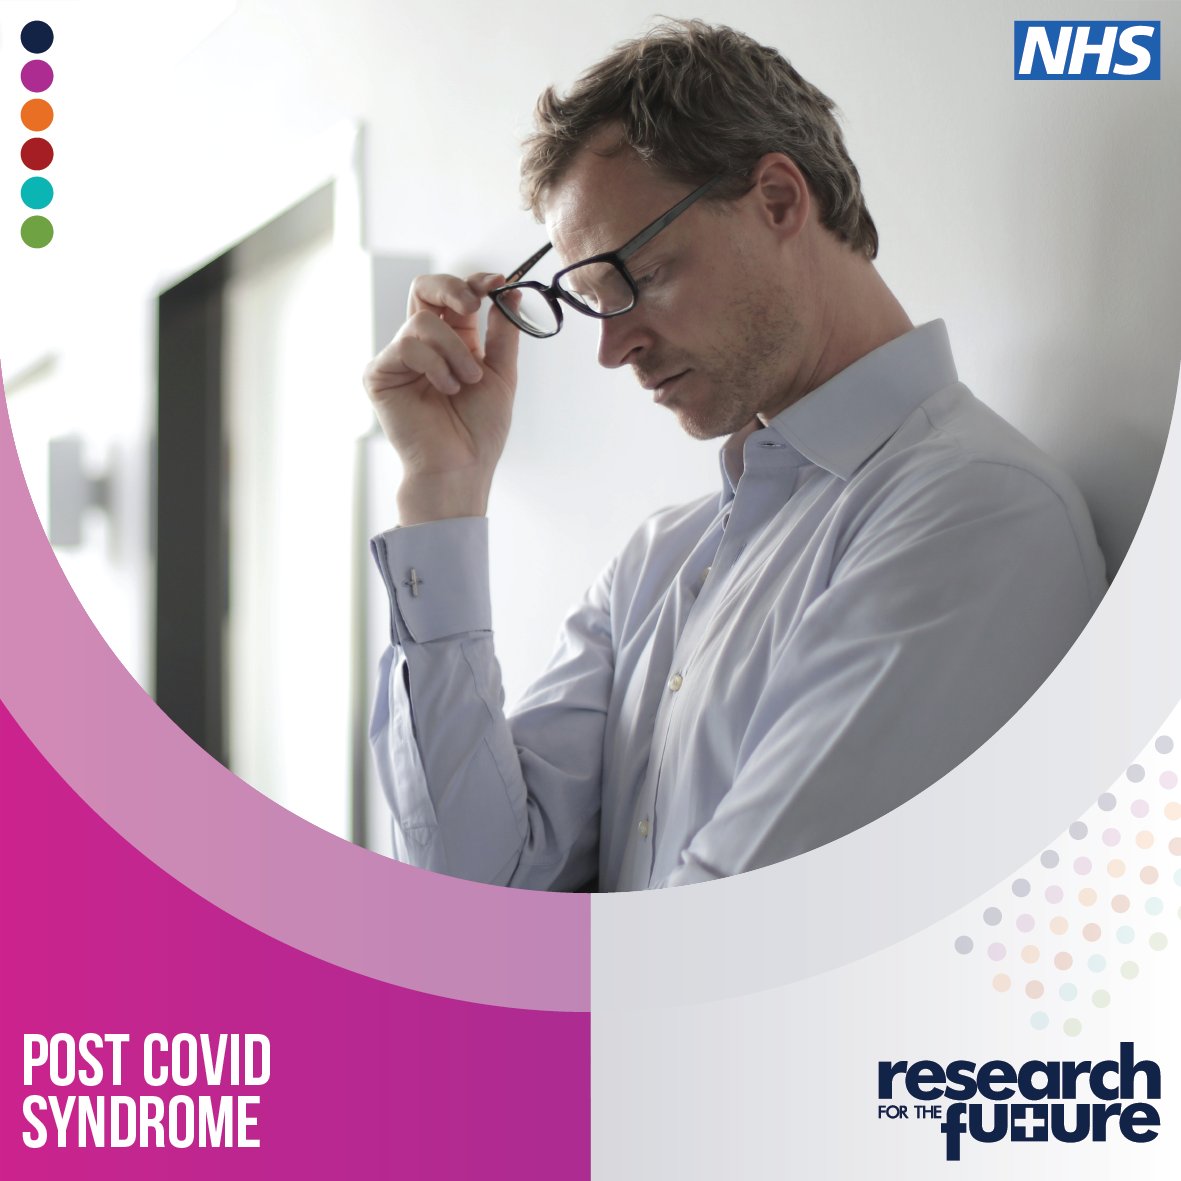 🟣 Can you help with research into long Covid? There have been more than 200 symptoms reported by people following infection with #Covid19 If you're experiencing any symptoms & want to help the NHS better understand the causes, register now for research: researchforthefuture.org/register